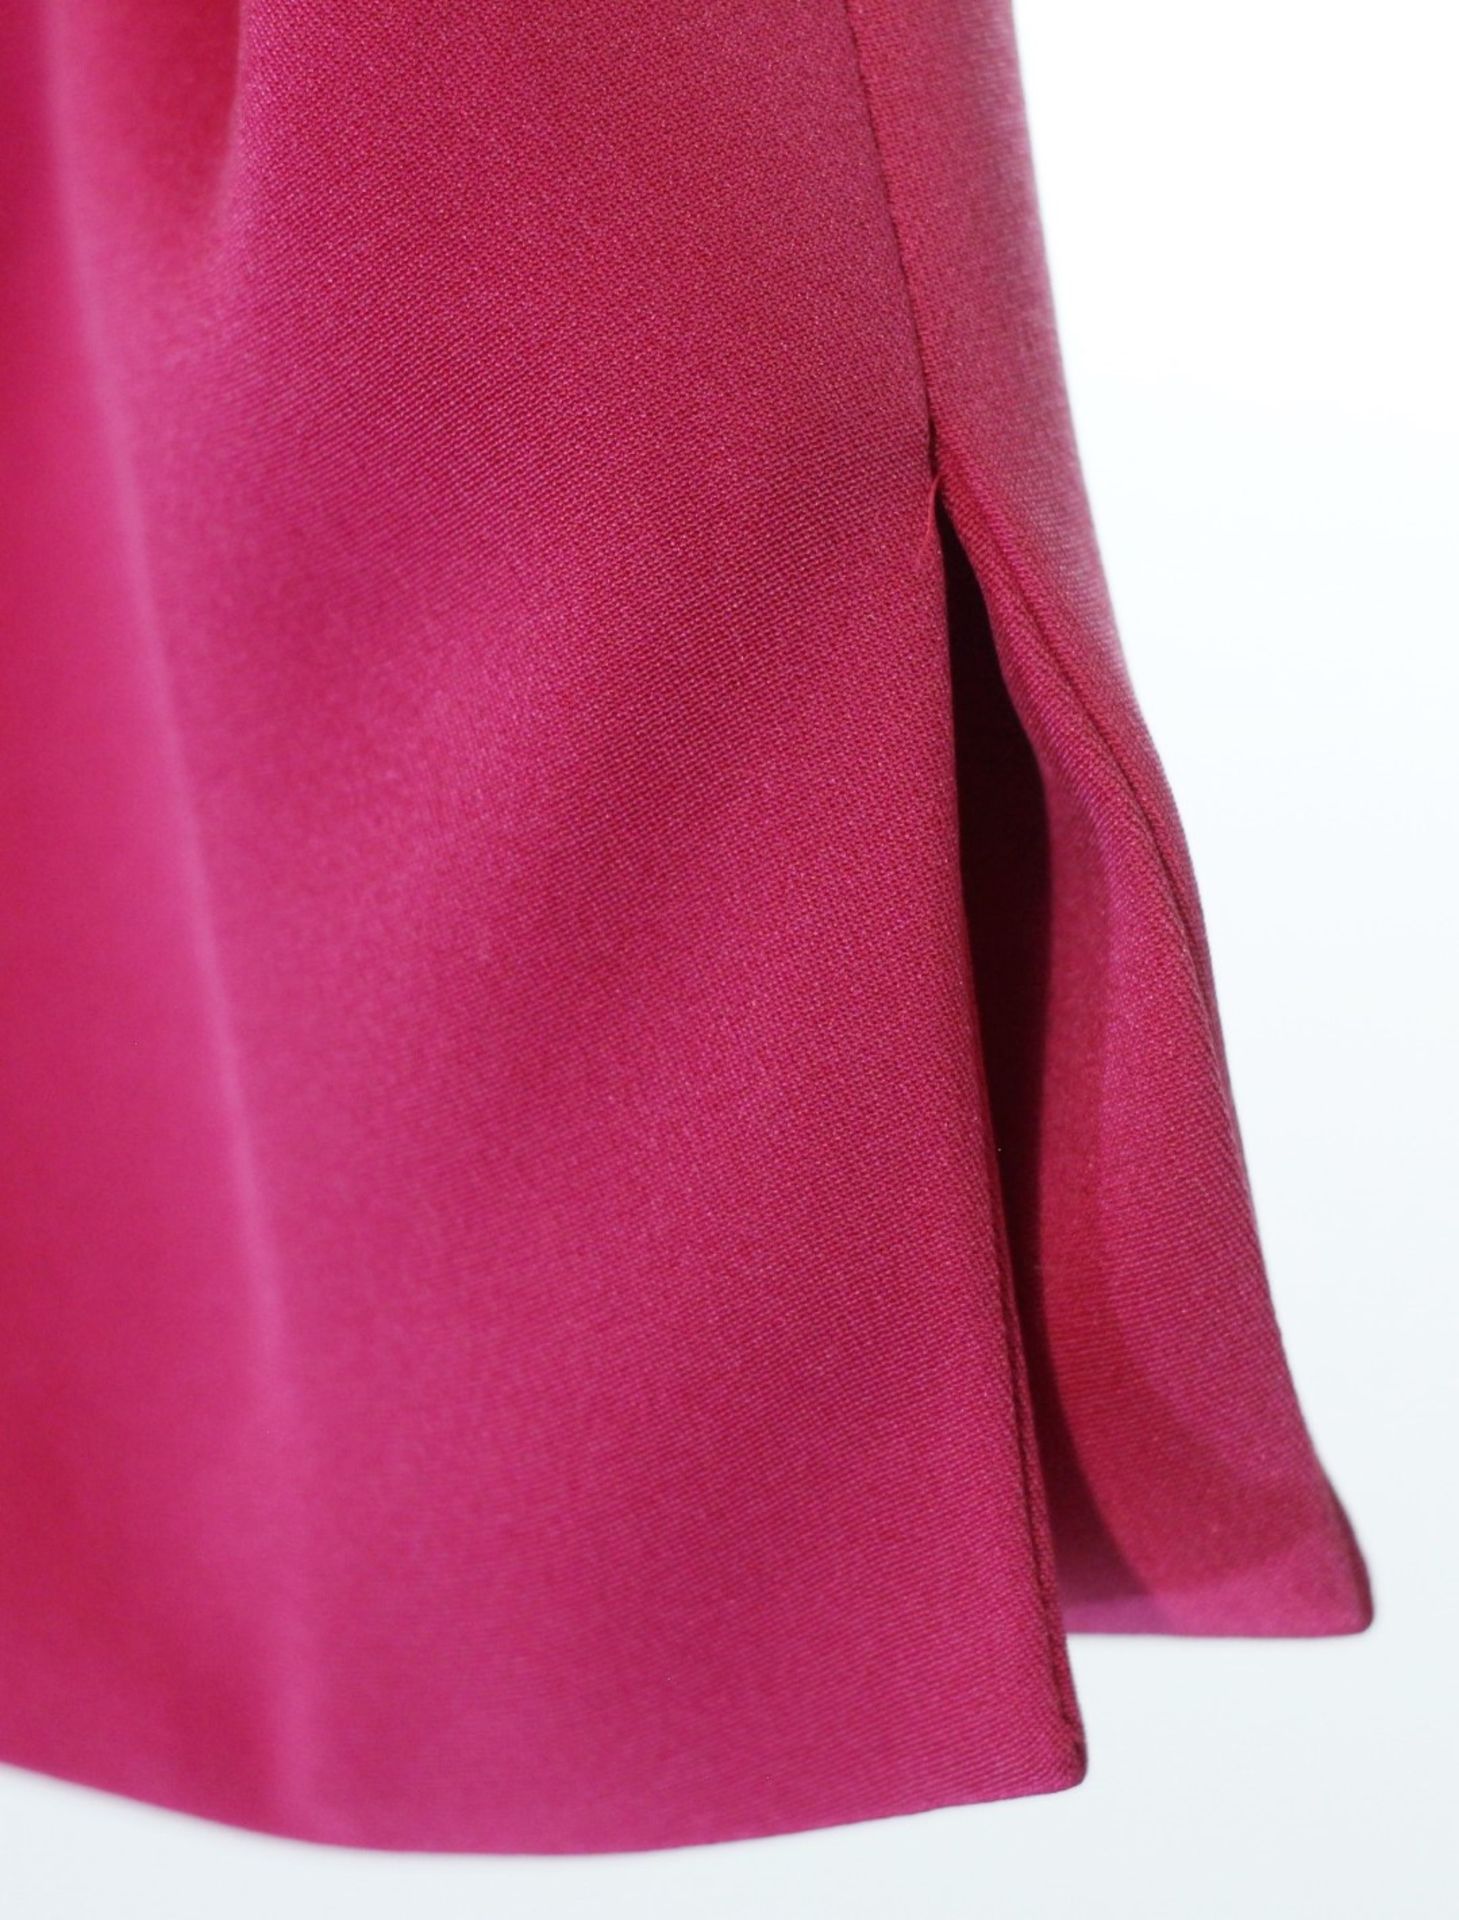 1 x Anne Belin Fuscia Jacket - Size: 18 - Material: 100% Silk - From a High End Clothing Boutique In - Image 7 of 9